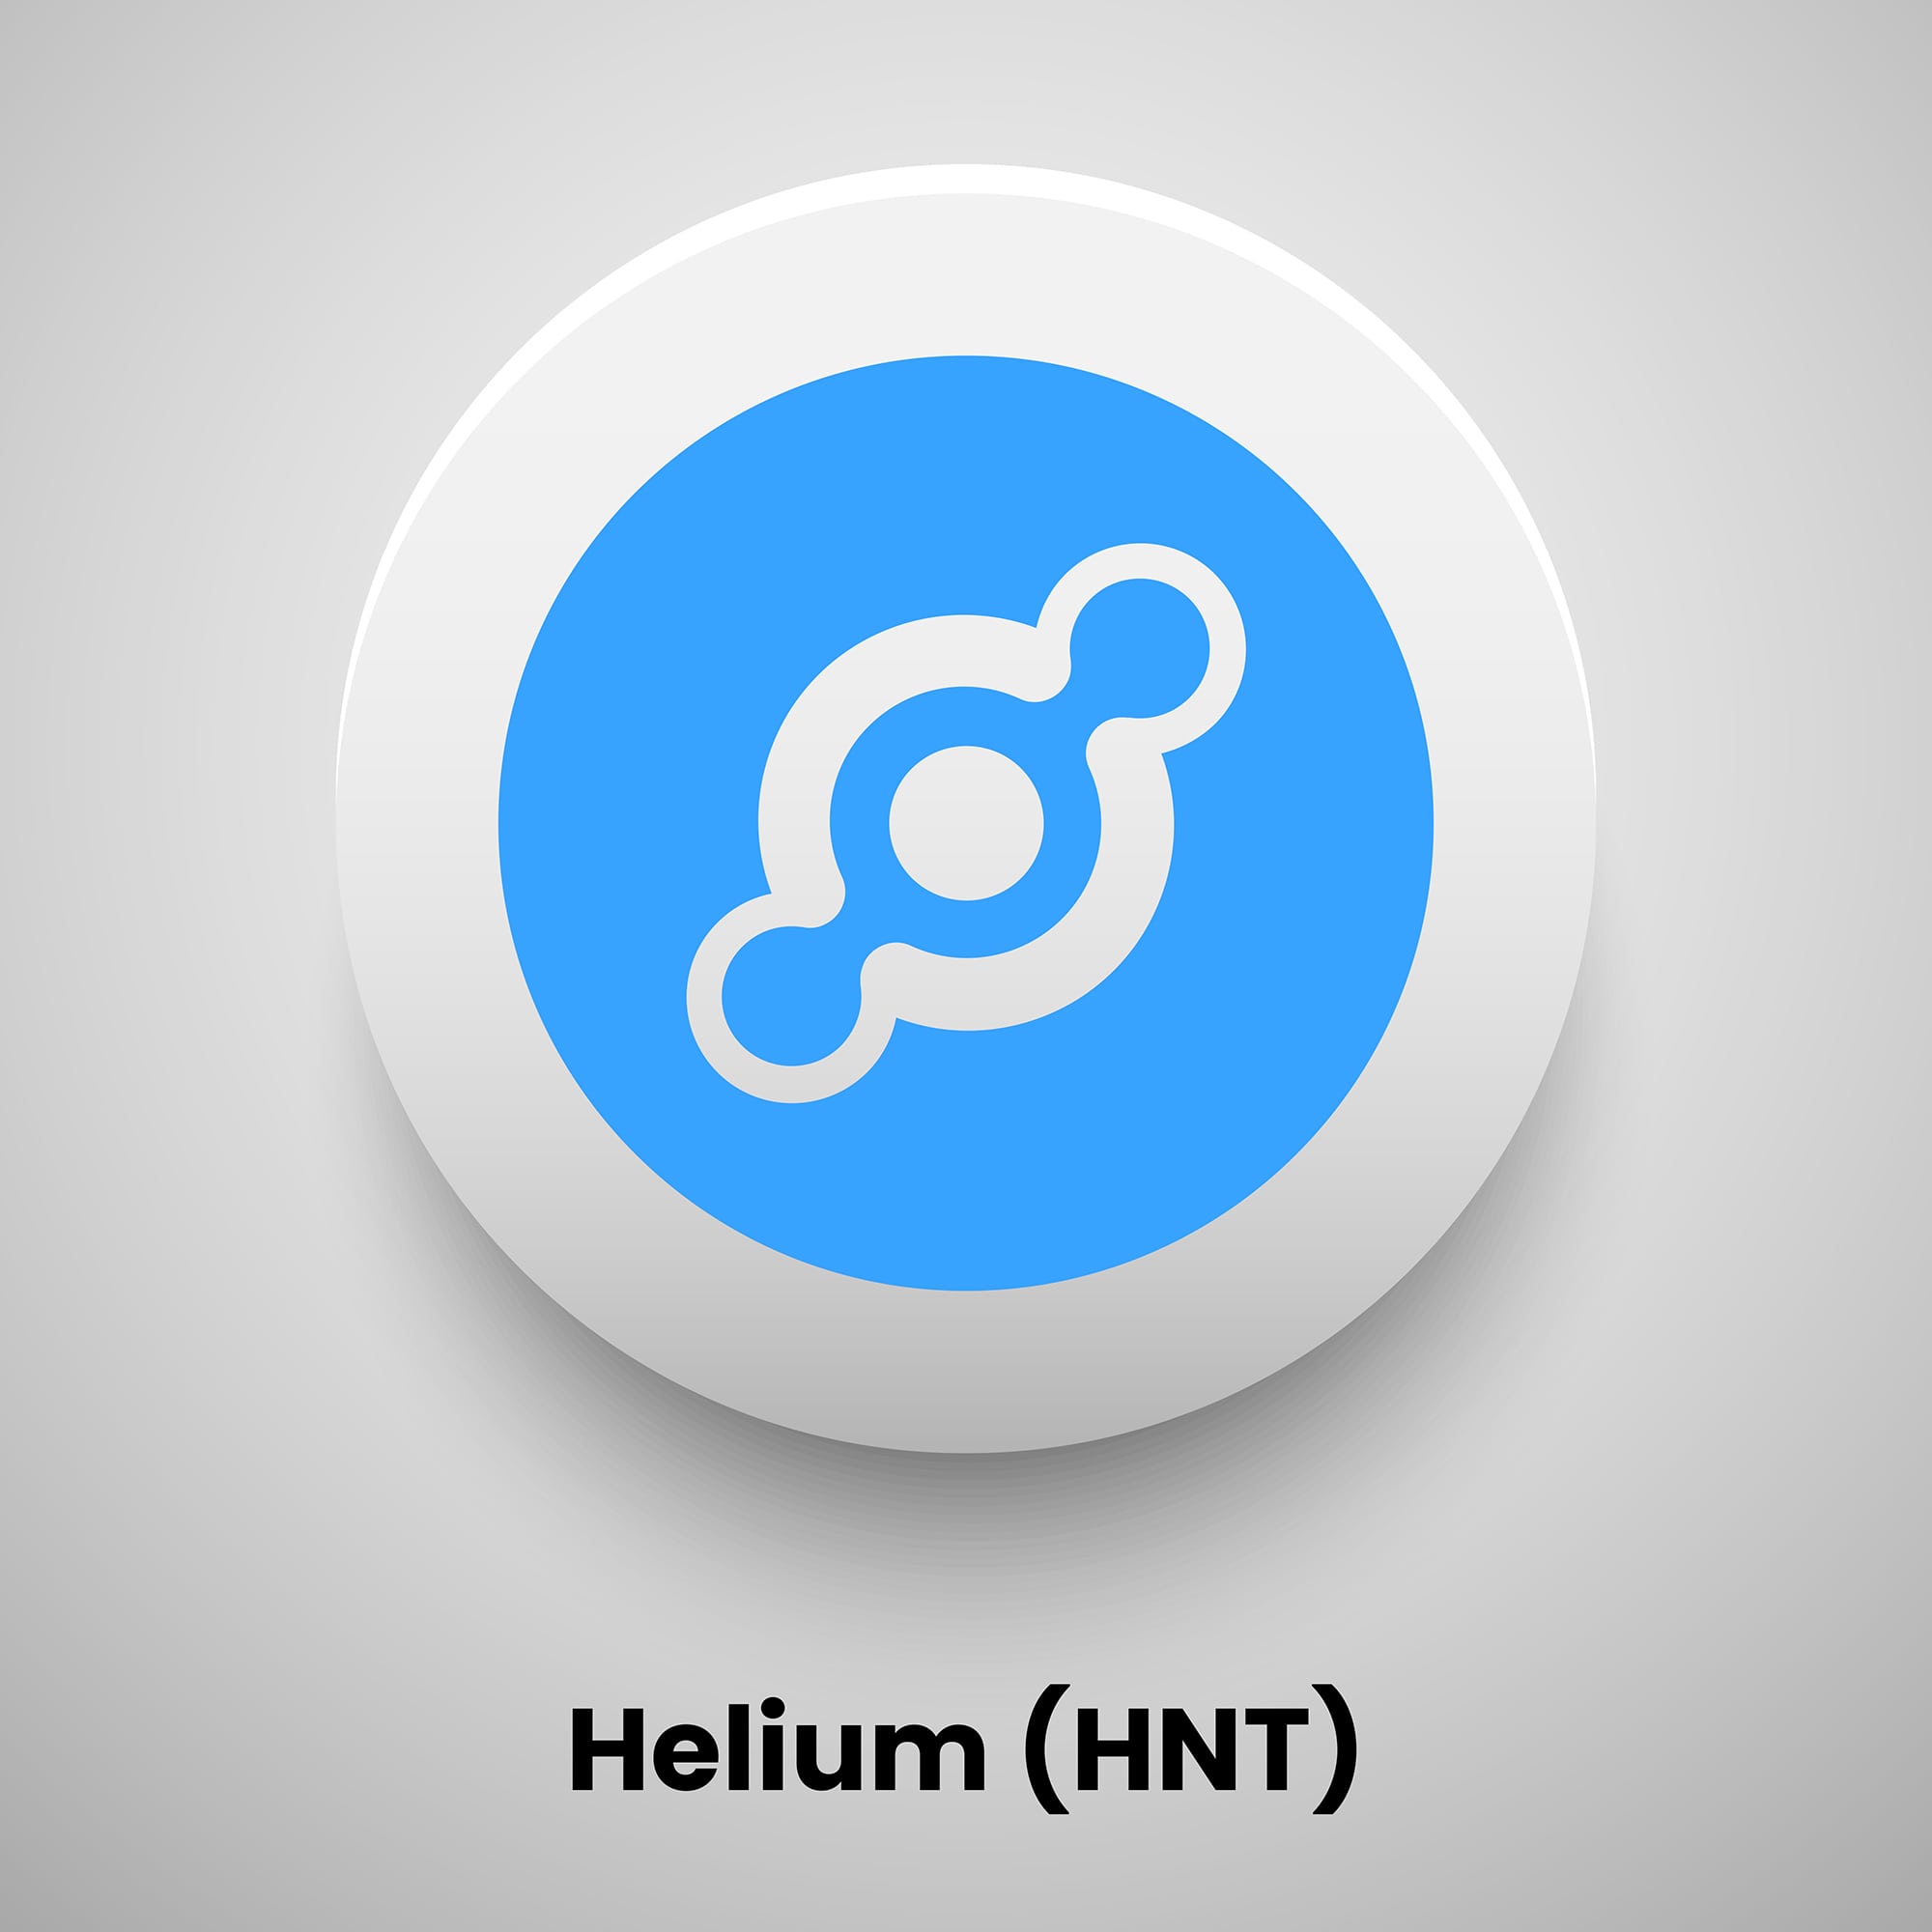 Helium (HNT) crypto currency logo free vector download